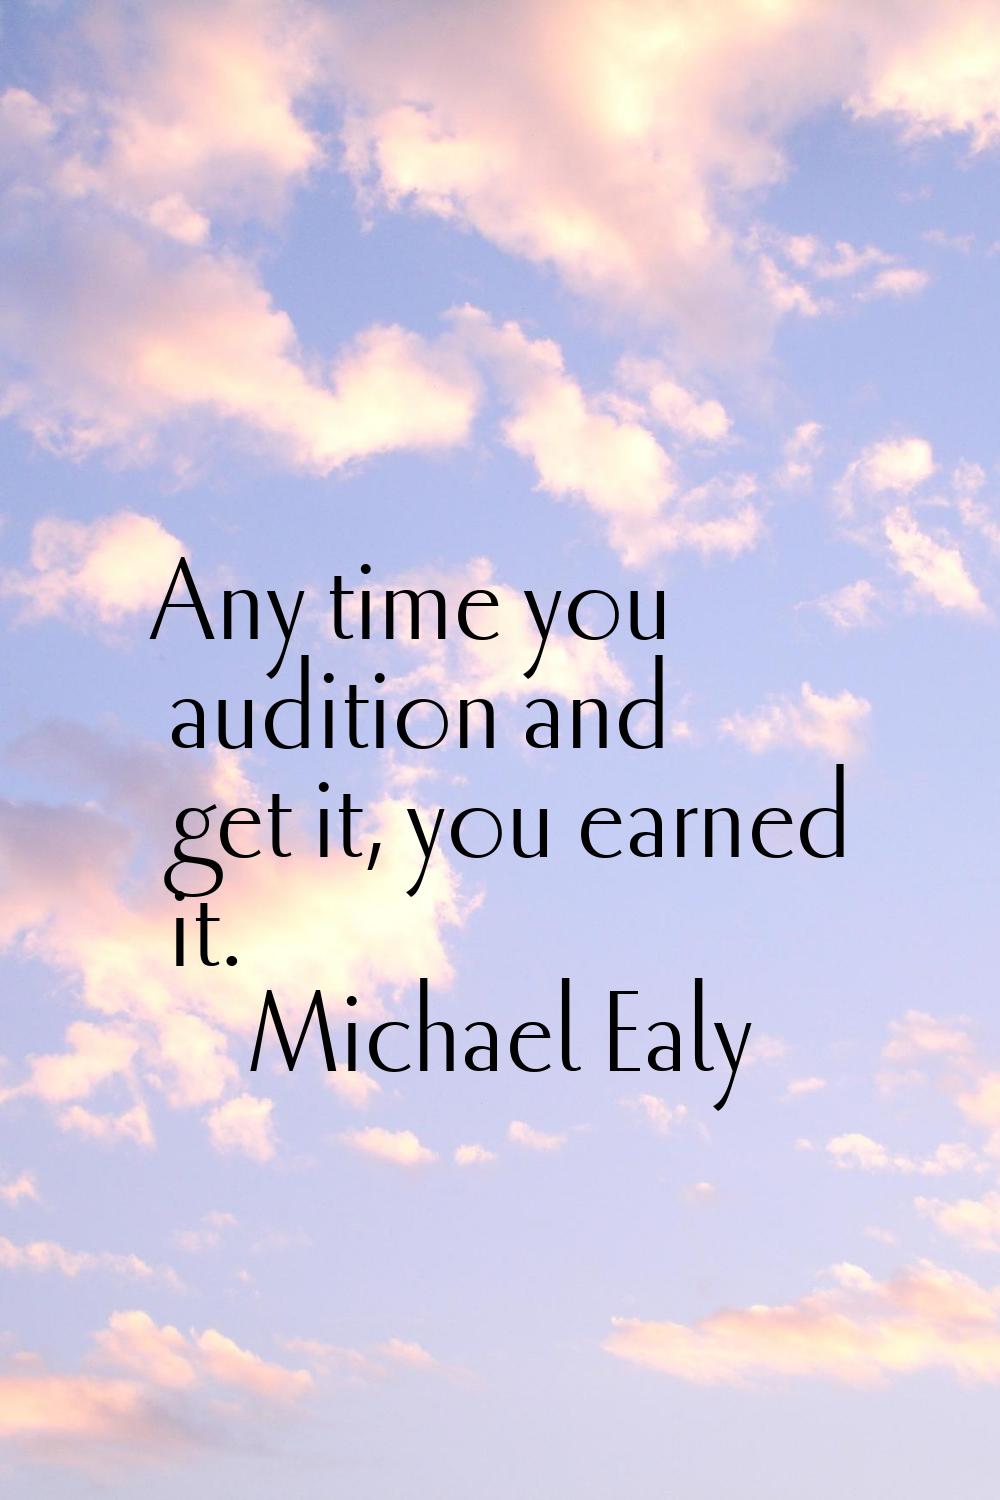 Any time you audition and get it, you earned it.